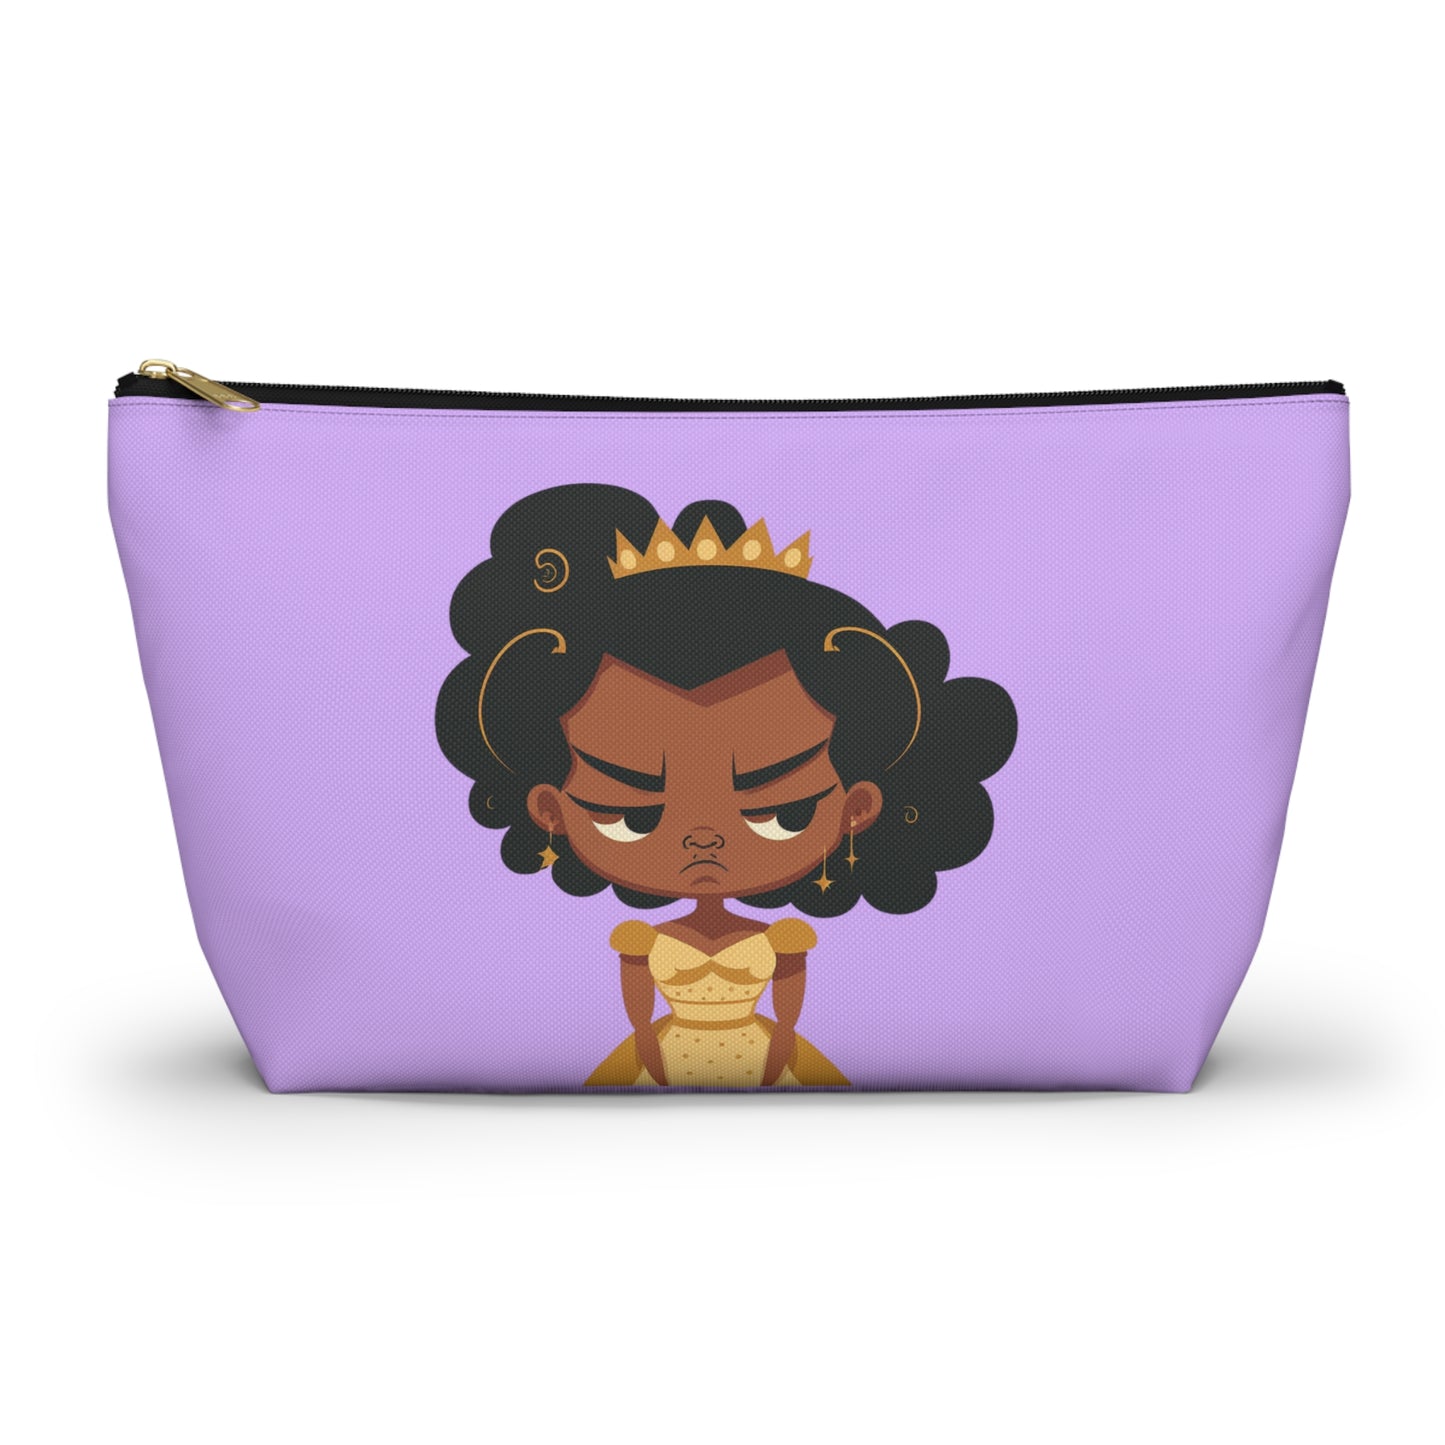 Abby Actinup - Princess Pouty Pouch